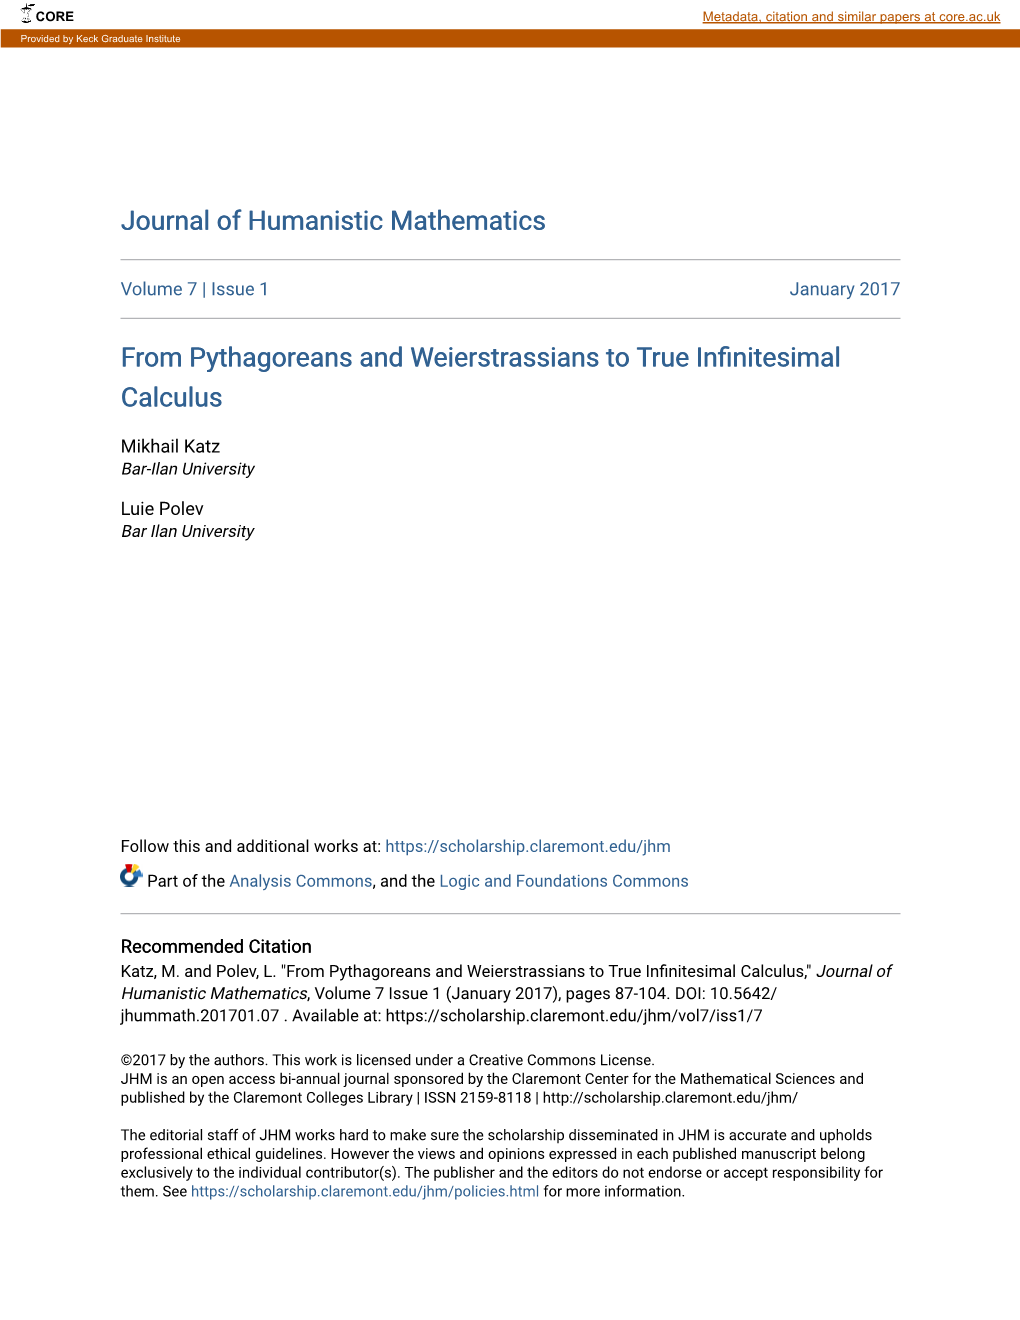 From Pythagoreans and Weierstrassians to True Infinitesimal Calculus